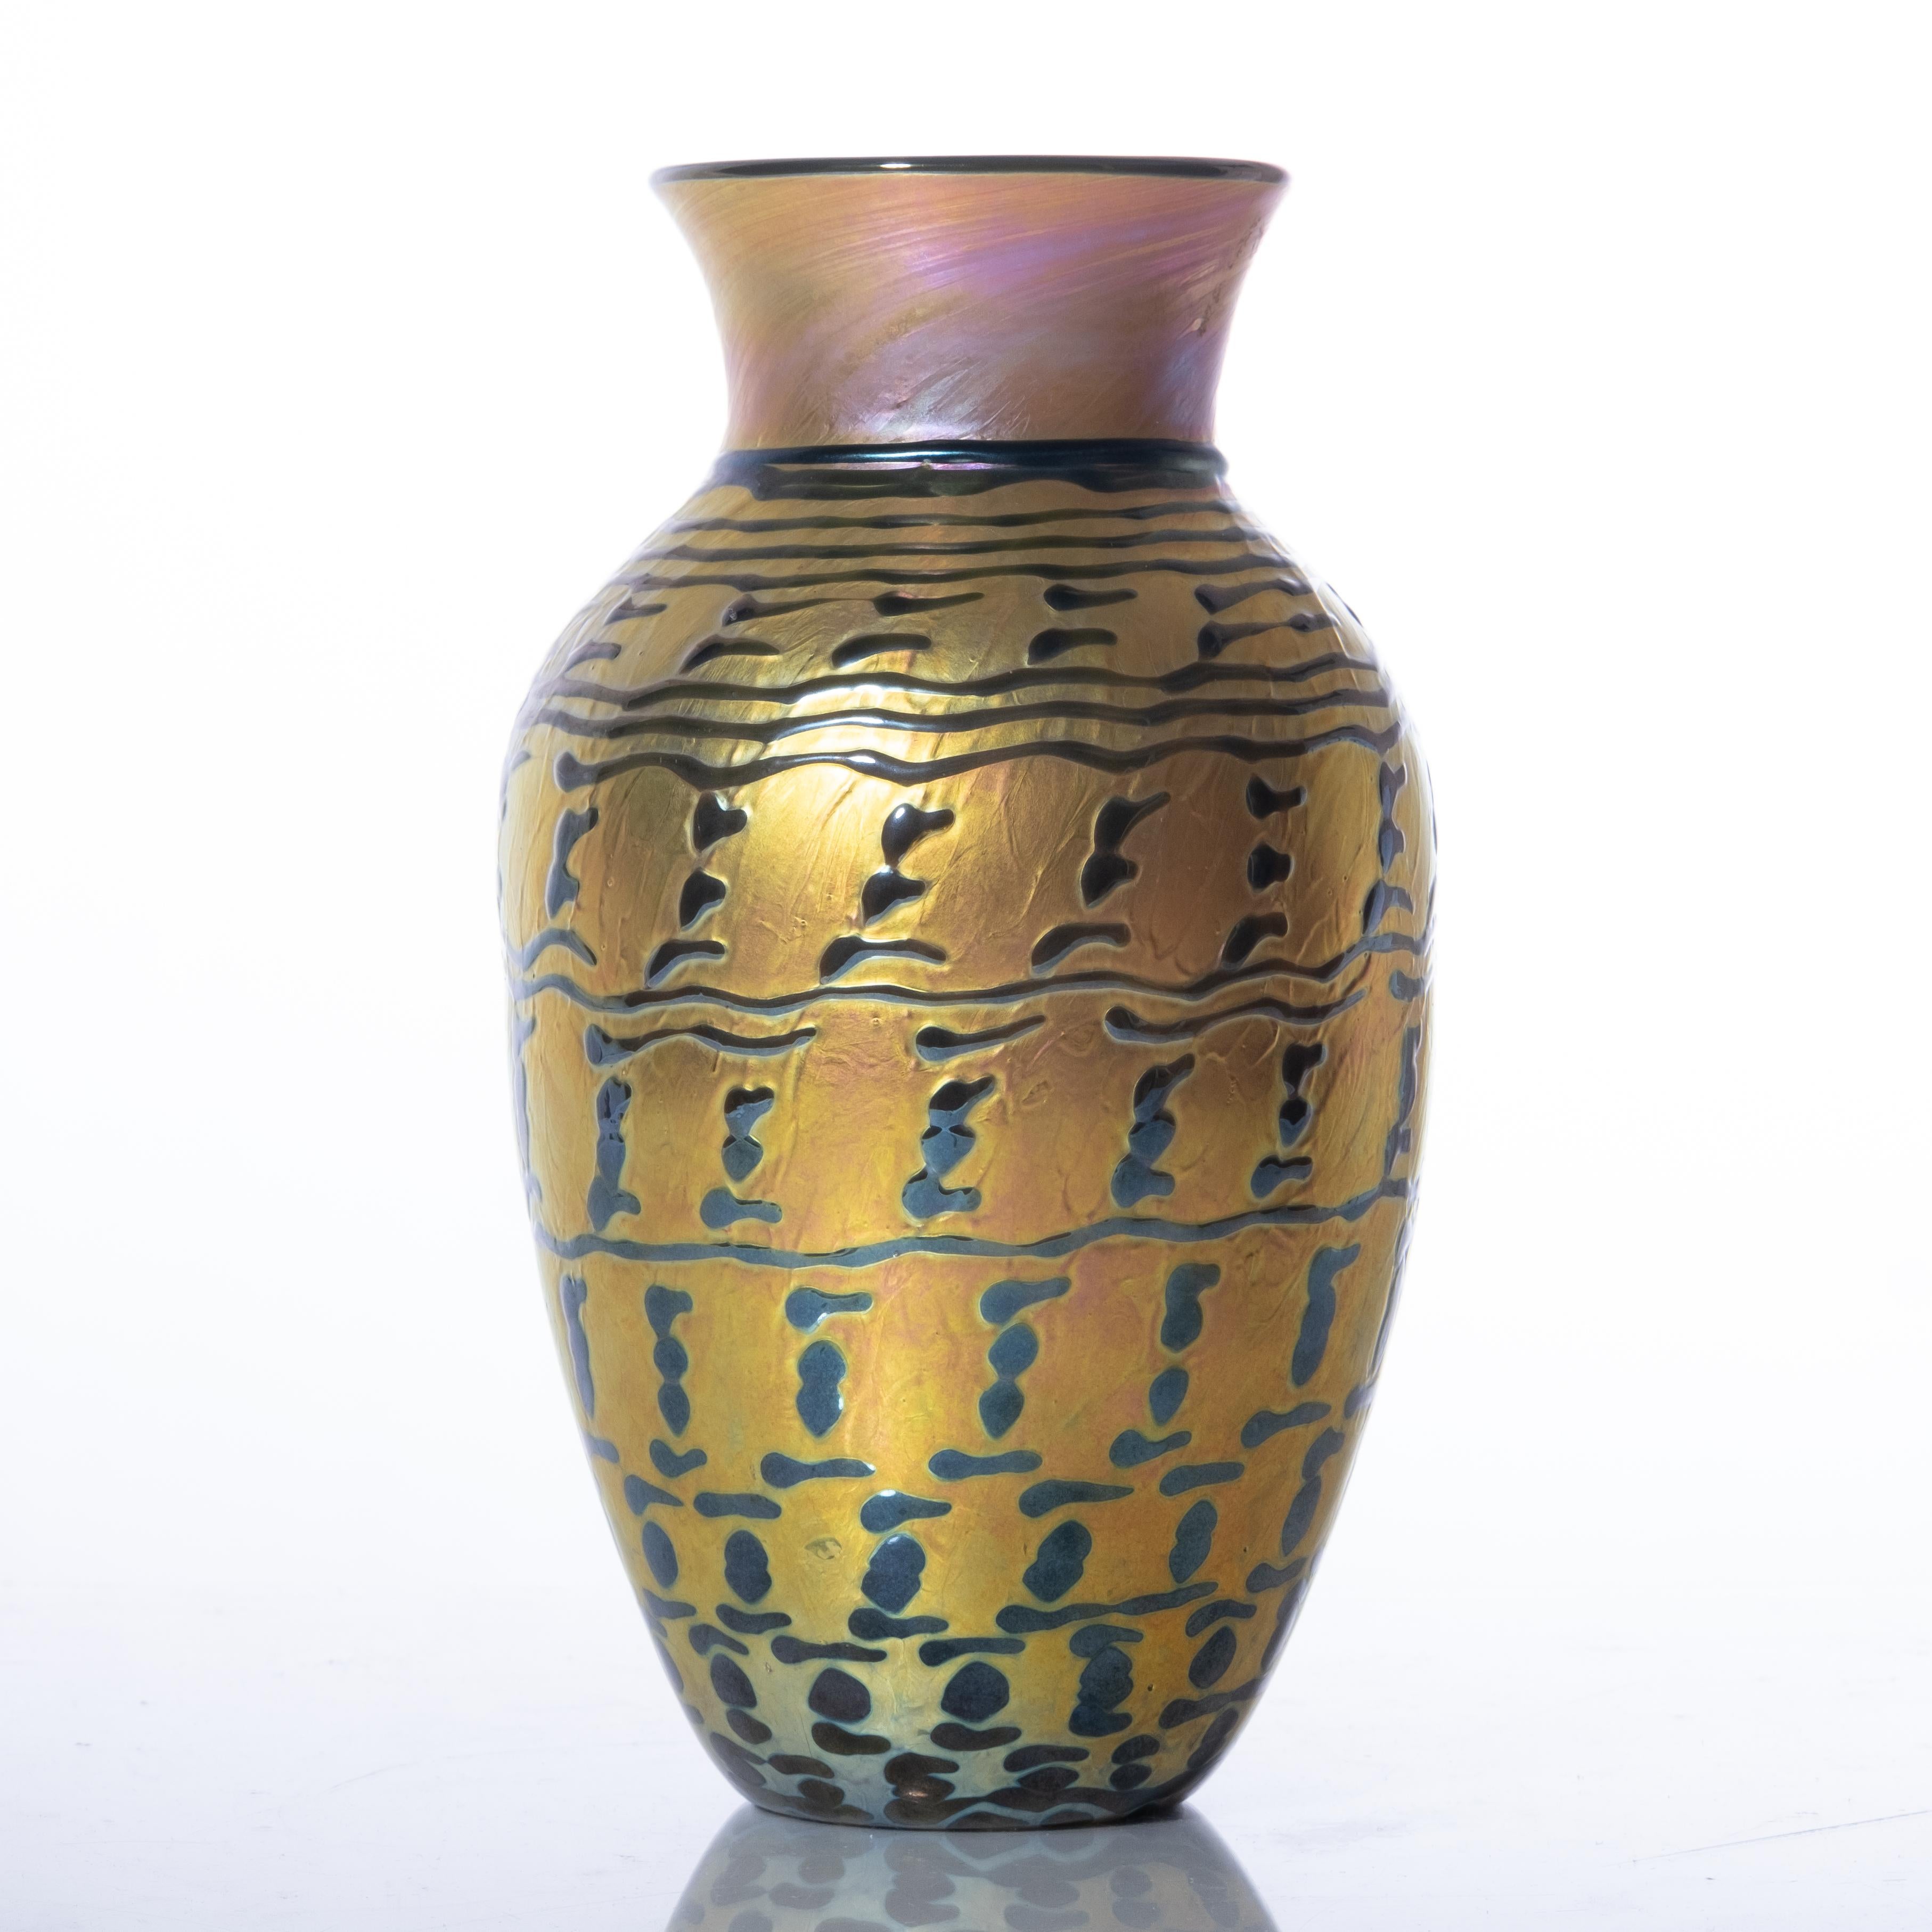 Lundburg Studios (American, established in 1970 by James Lundberg). Jade Indian Basket Gourd Vase. An iridescent vase having enamel relief decoration. Lot is accompanied by card, noting design # & name, circa 1997.

Provenance is the Cordts